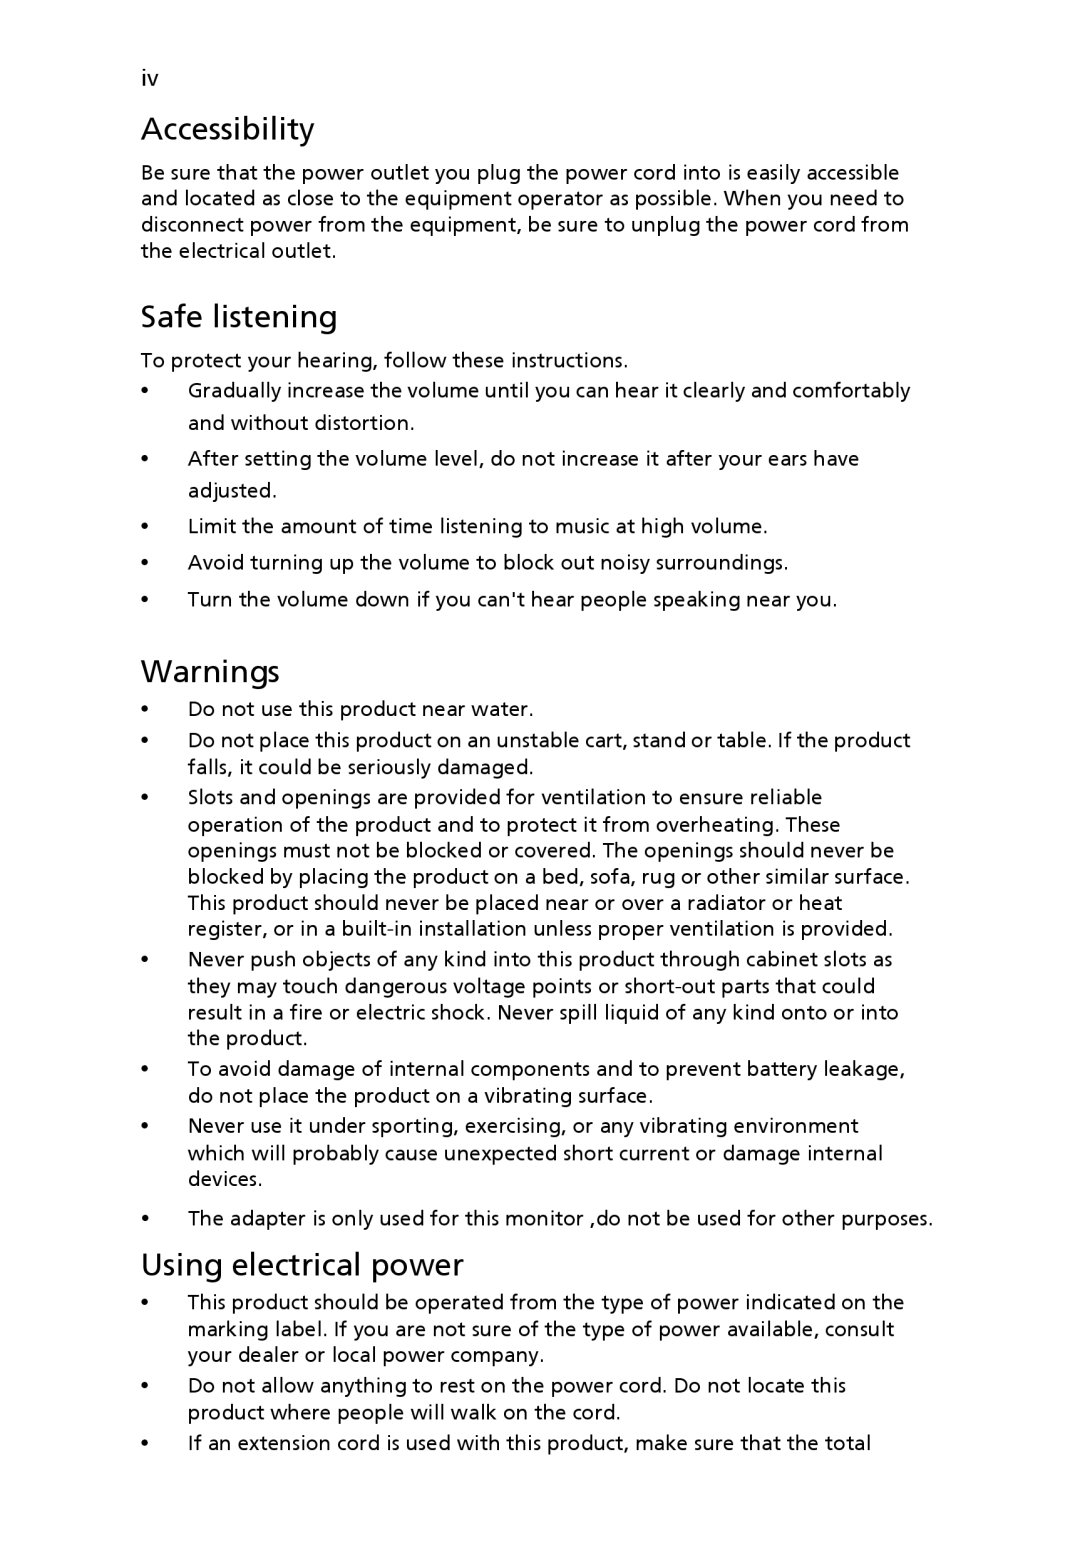 Acer S243HL manual Accessibility, Safe listening, Warnings, Using electrical power 